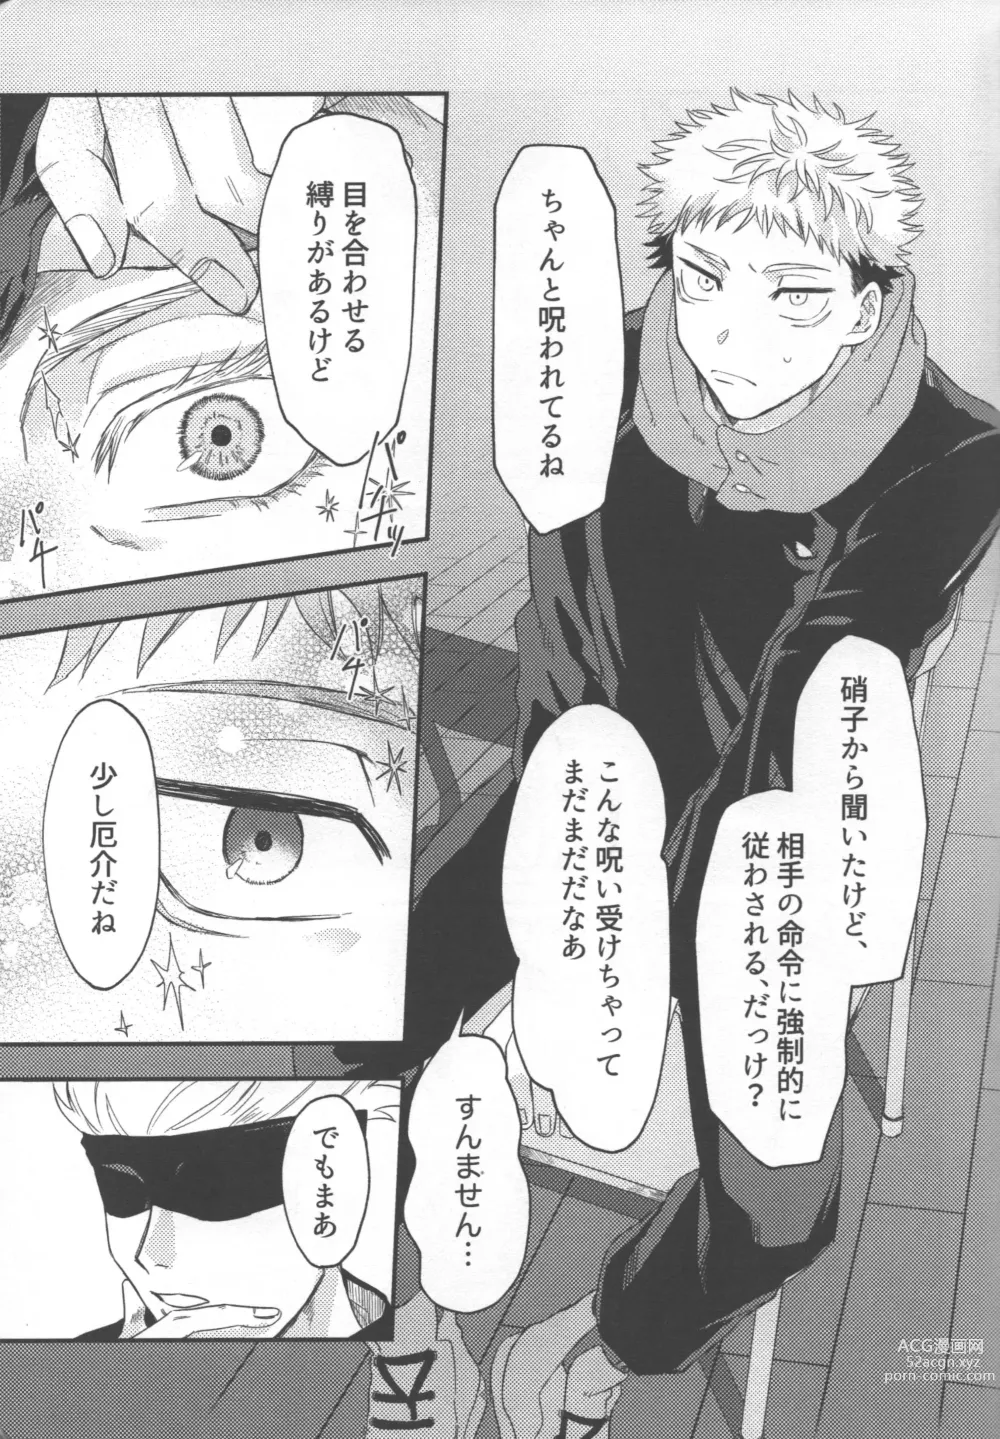 Page 4 of doujinshi Dont Look at ME Like That.